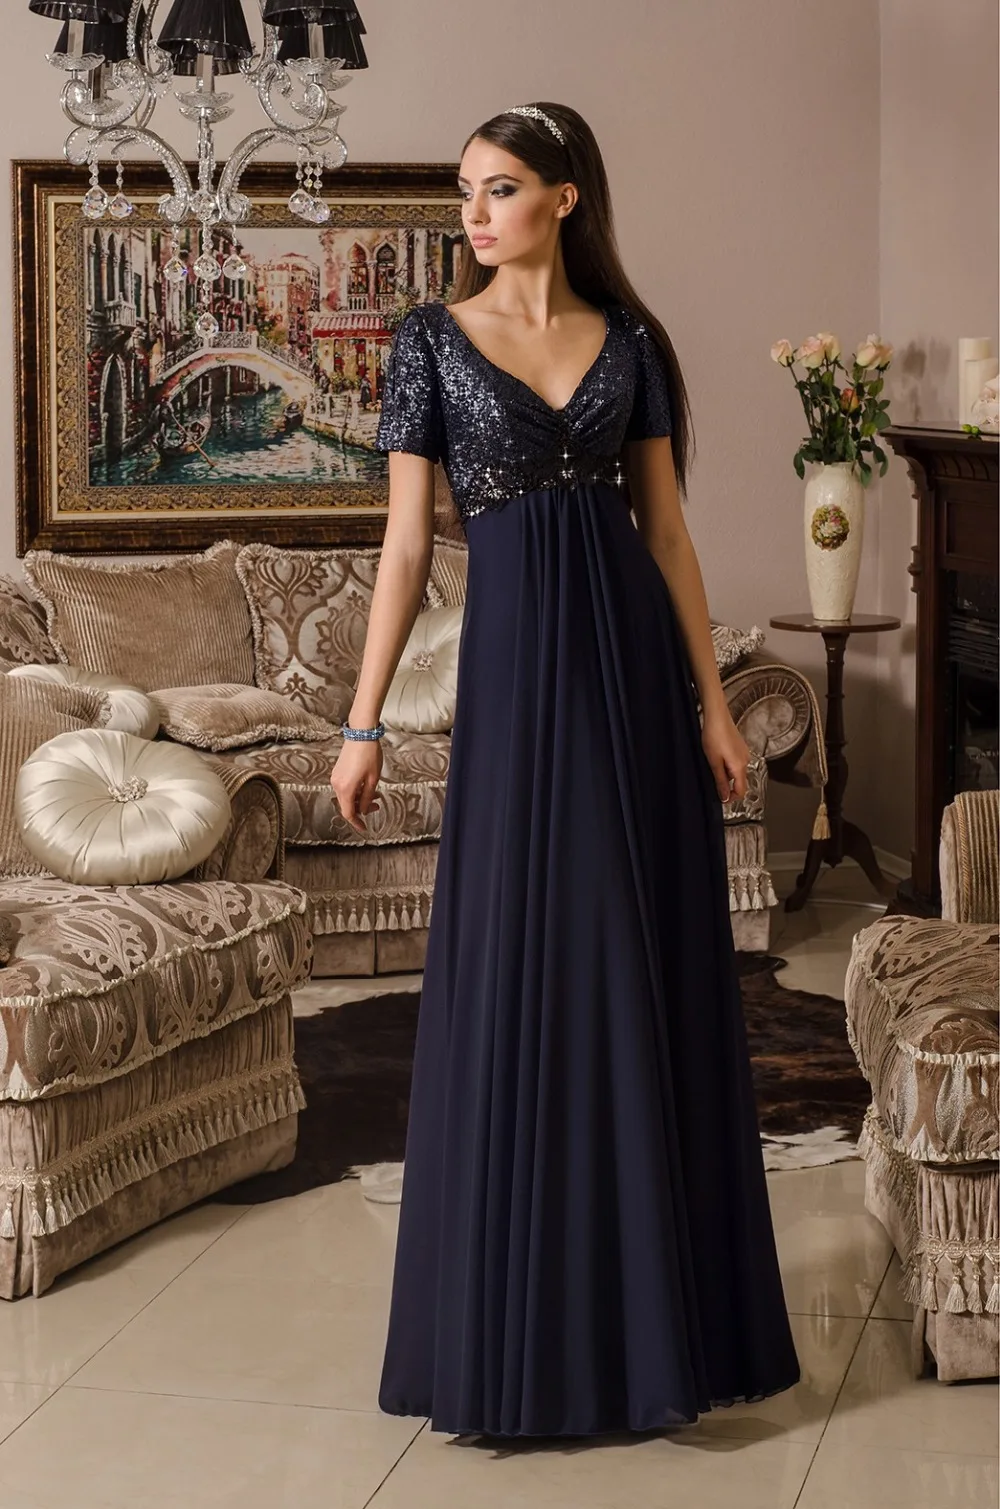 Akd-05 Plus Size Formal Party Evening Gown 2015 Navy Blue Sequins